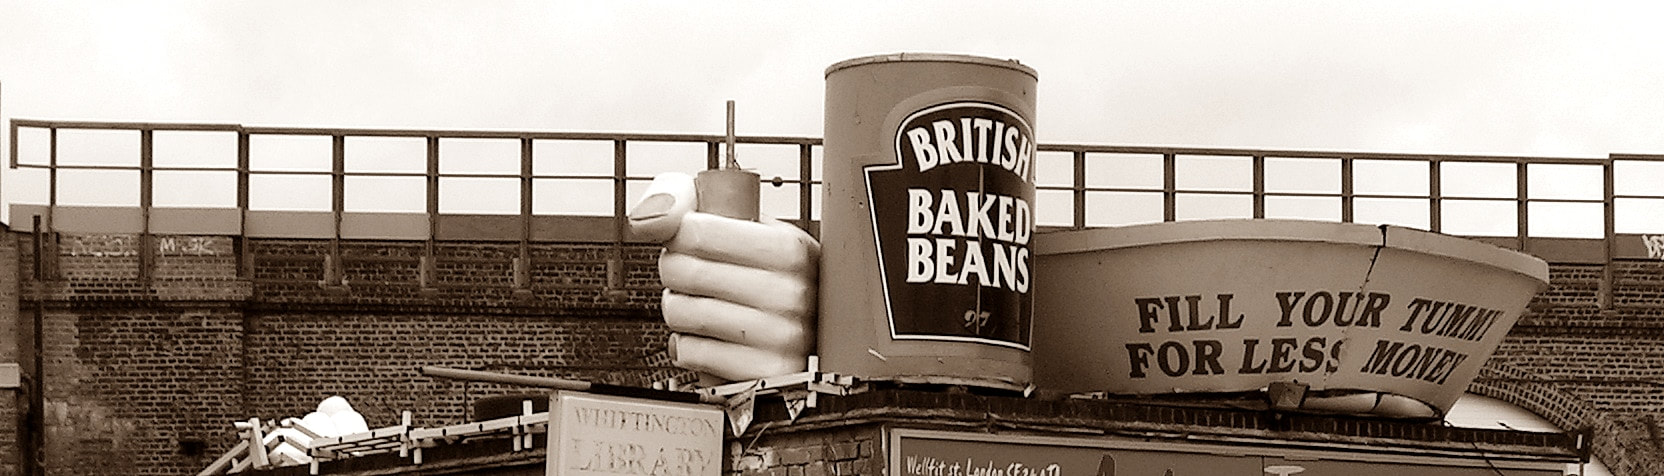 Giant Heinz Baked Bean Tin on top of a cafe near Brixton with a sign that says Fill Your Tummy for Less Money